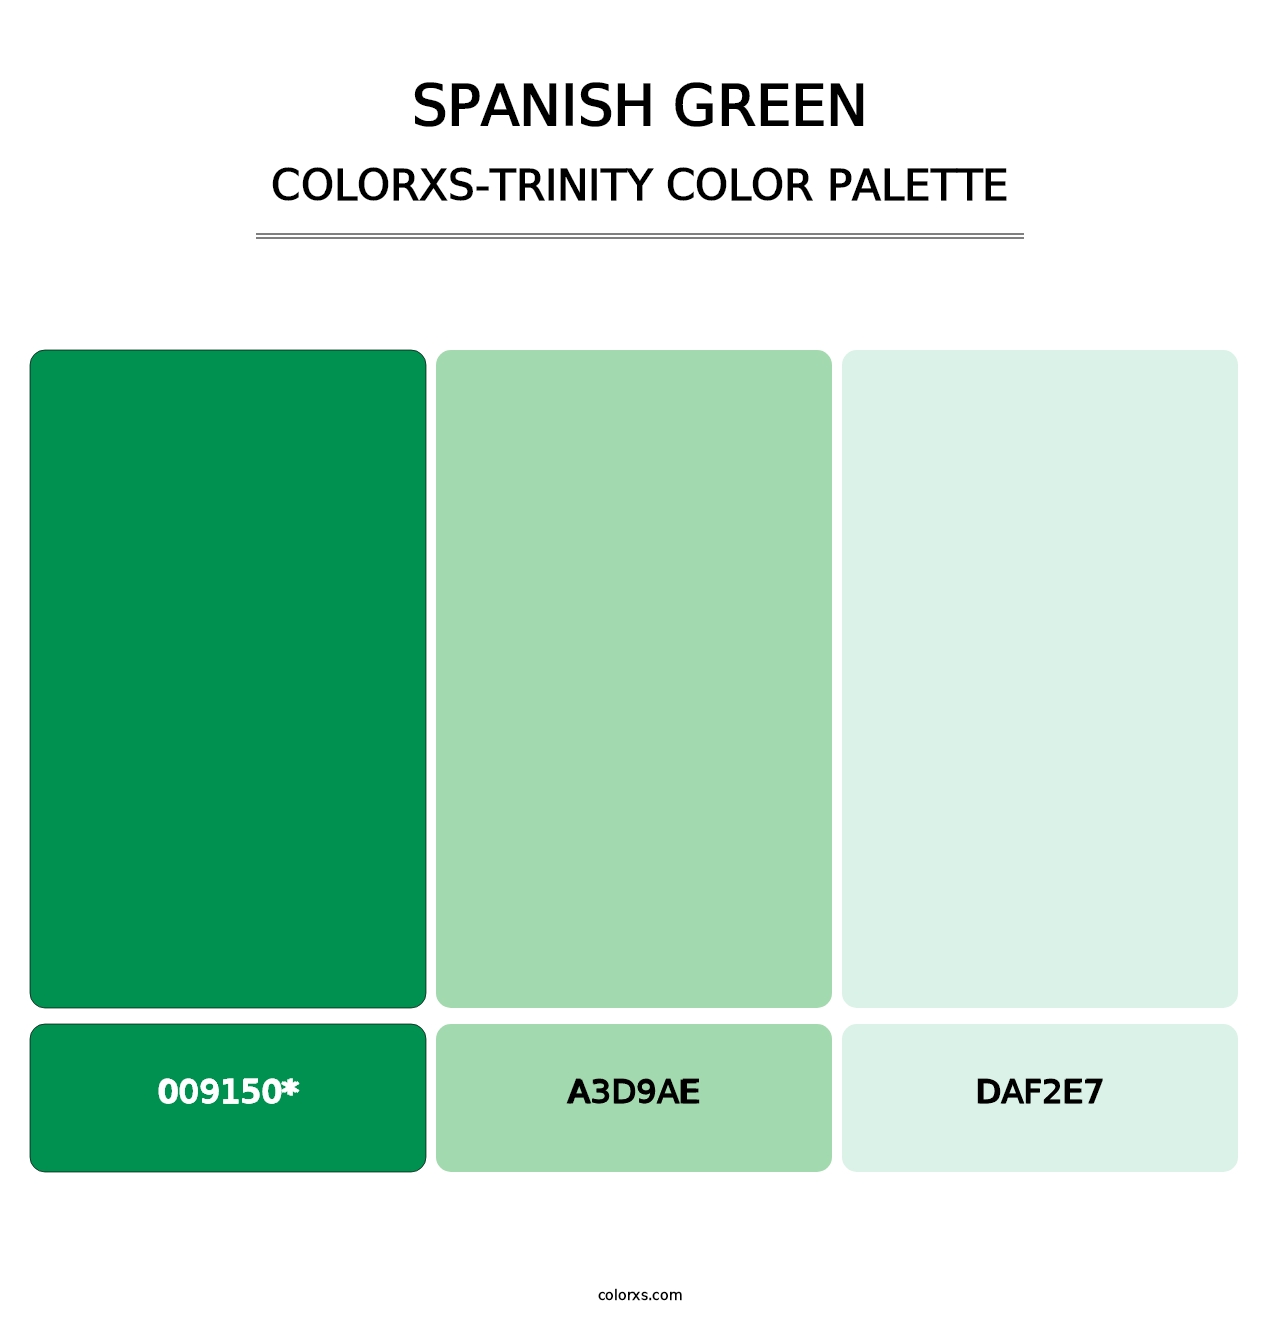 Spanish Green - Colorxs Trinity Palette